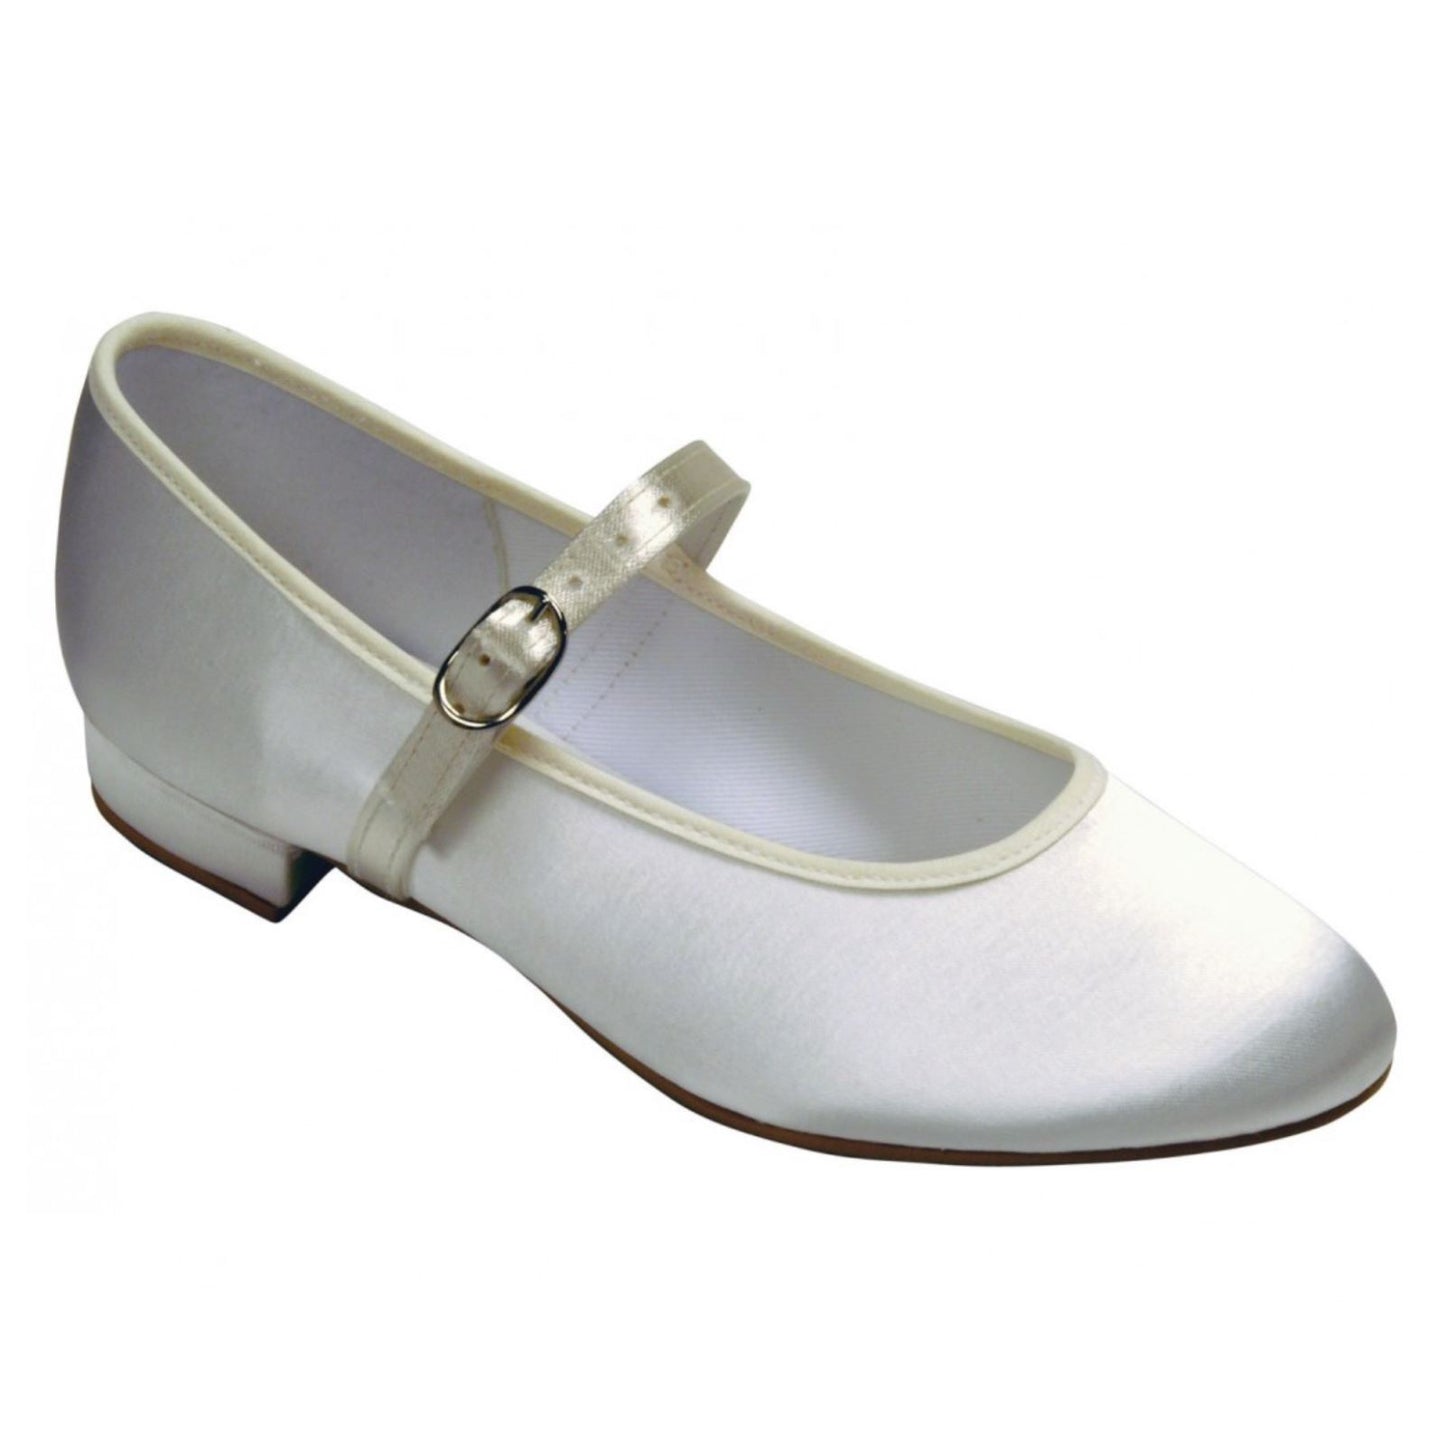 TAPPERS & POINTERS HOLLY LOW HEEL SATIN SHOE Weddings & Christenings Tappers and Pointers 